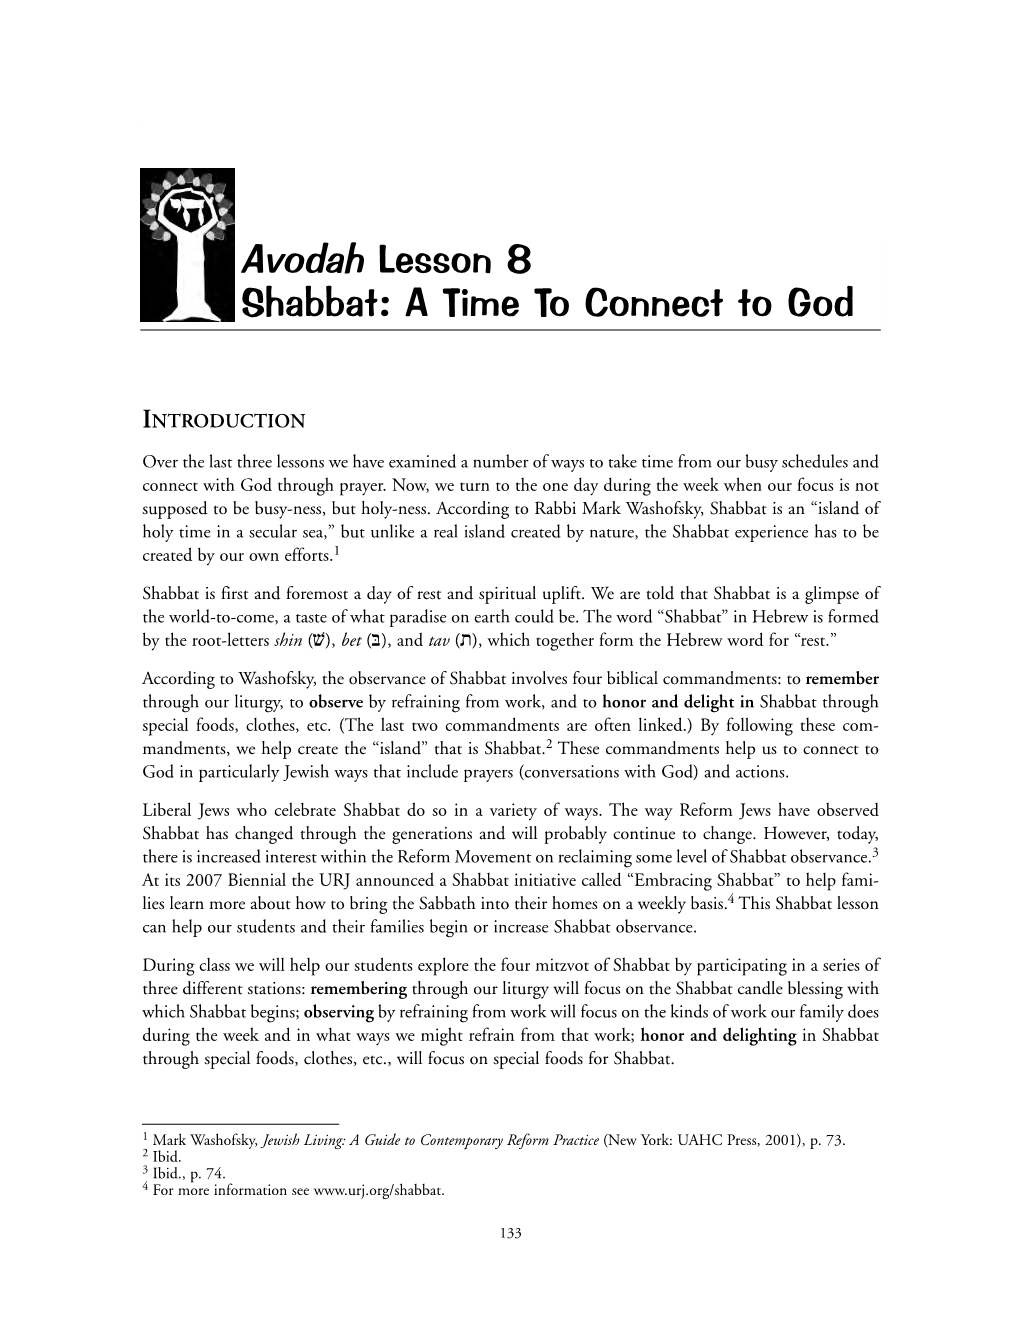 Avodah Lesson 8 Shabbat: a Time to Connect to God